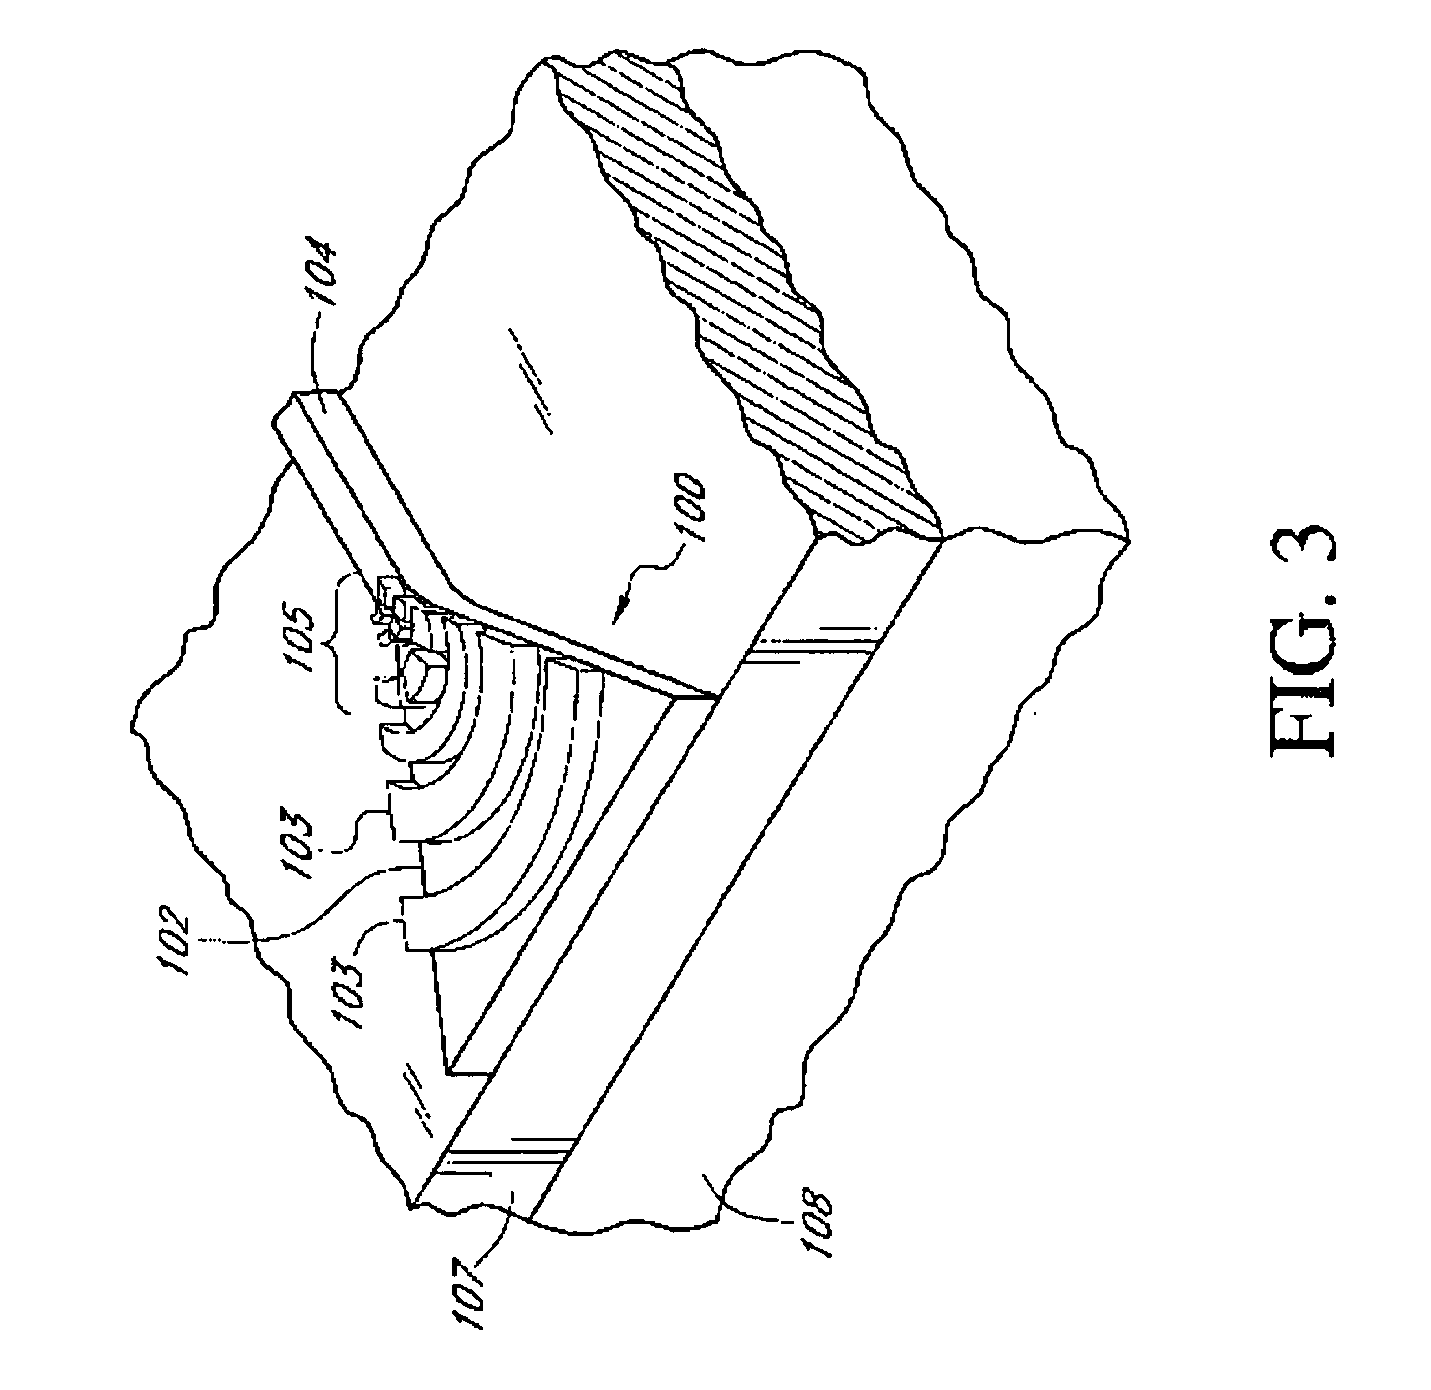 Optical waveguide grating coupler with varying scatter cross sections